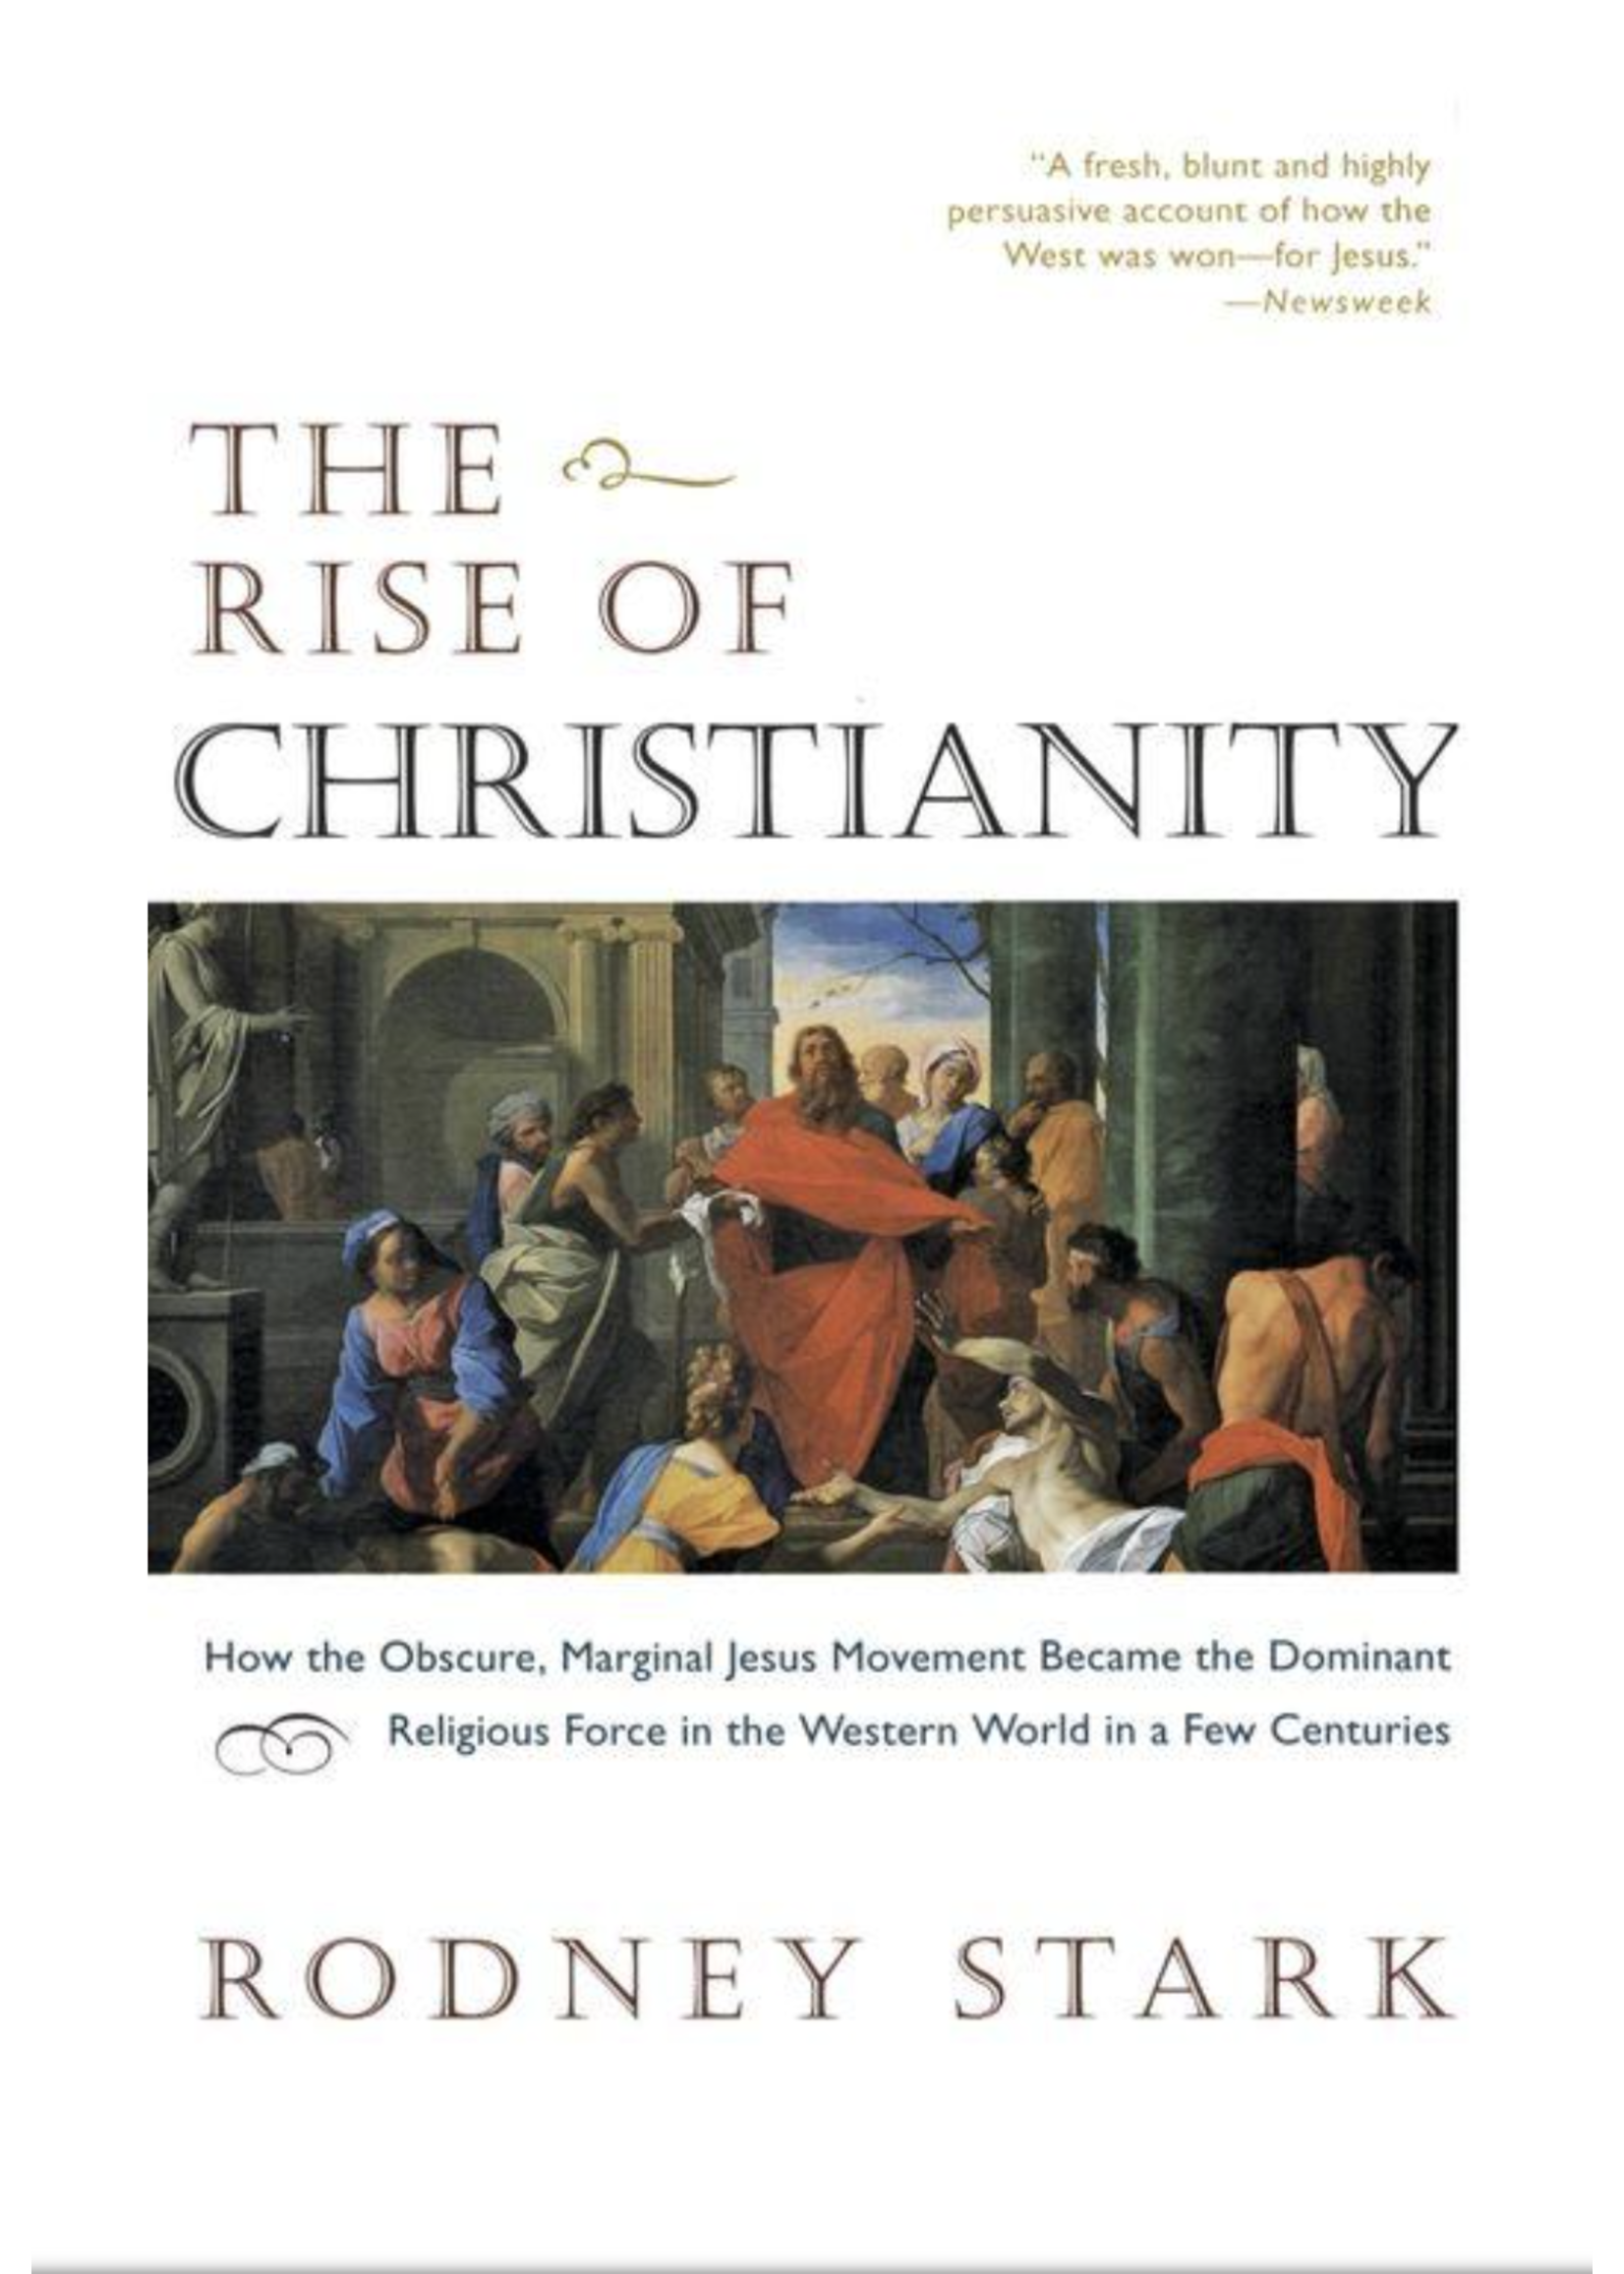 STARK, RODNEY The Rise of Christianity How the Obscure, Marginal Jesus Movement Became the Dominant Religious Force in the Western World in a Few Centuries